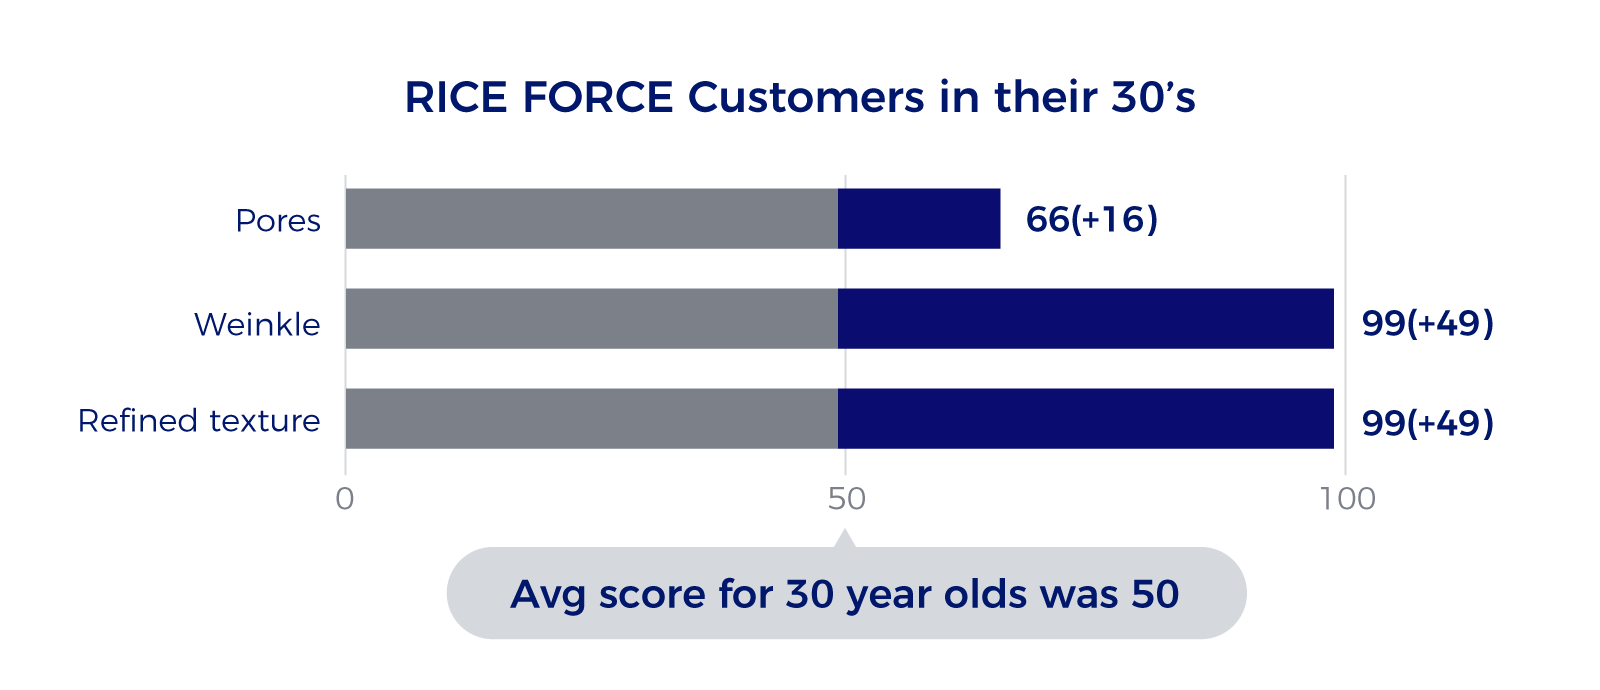 RICE FORCE Customers in their 30’s